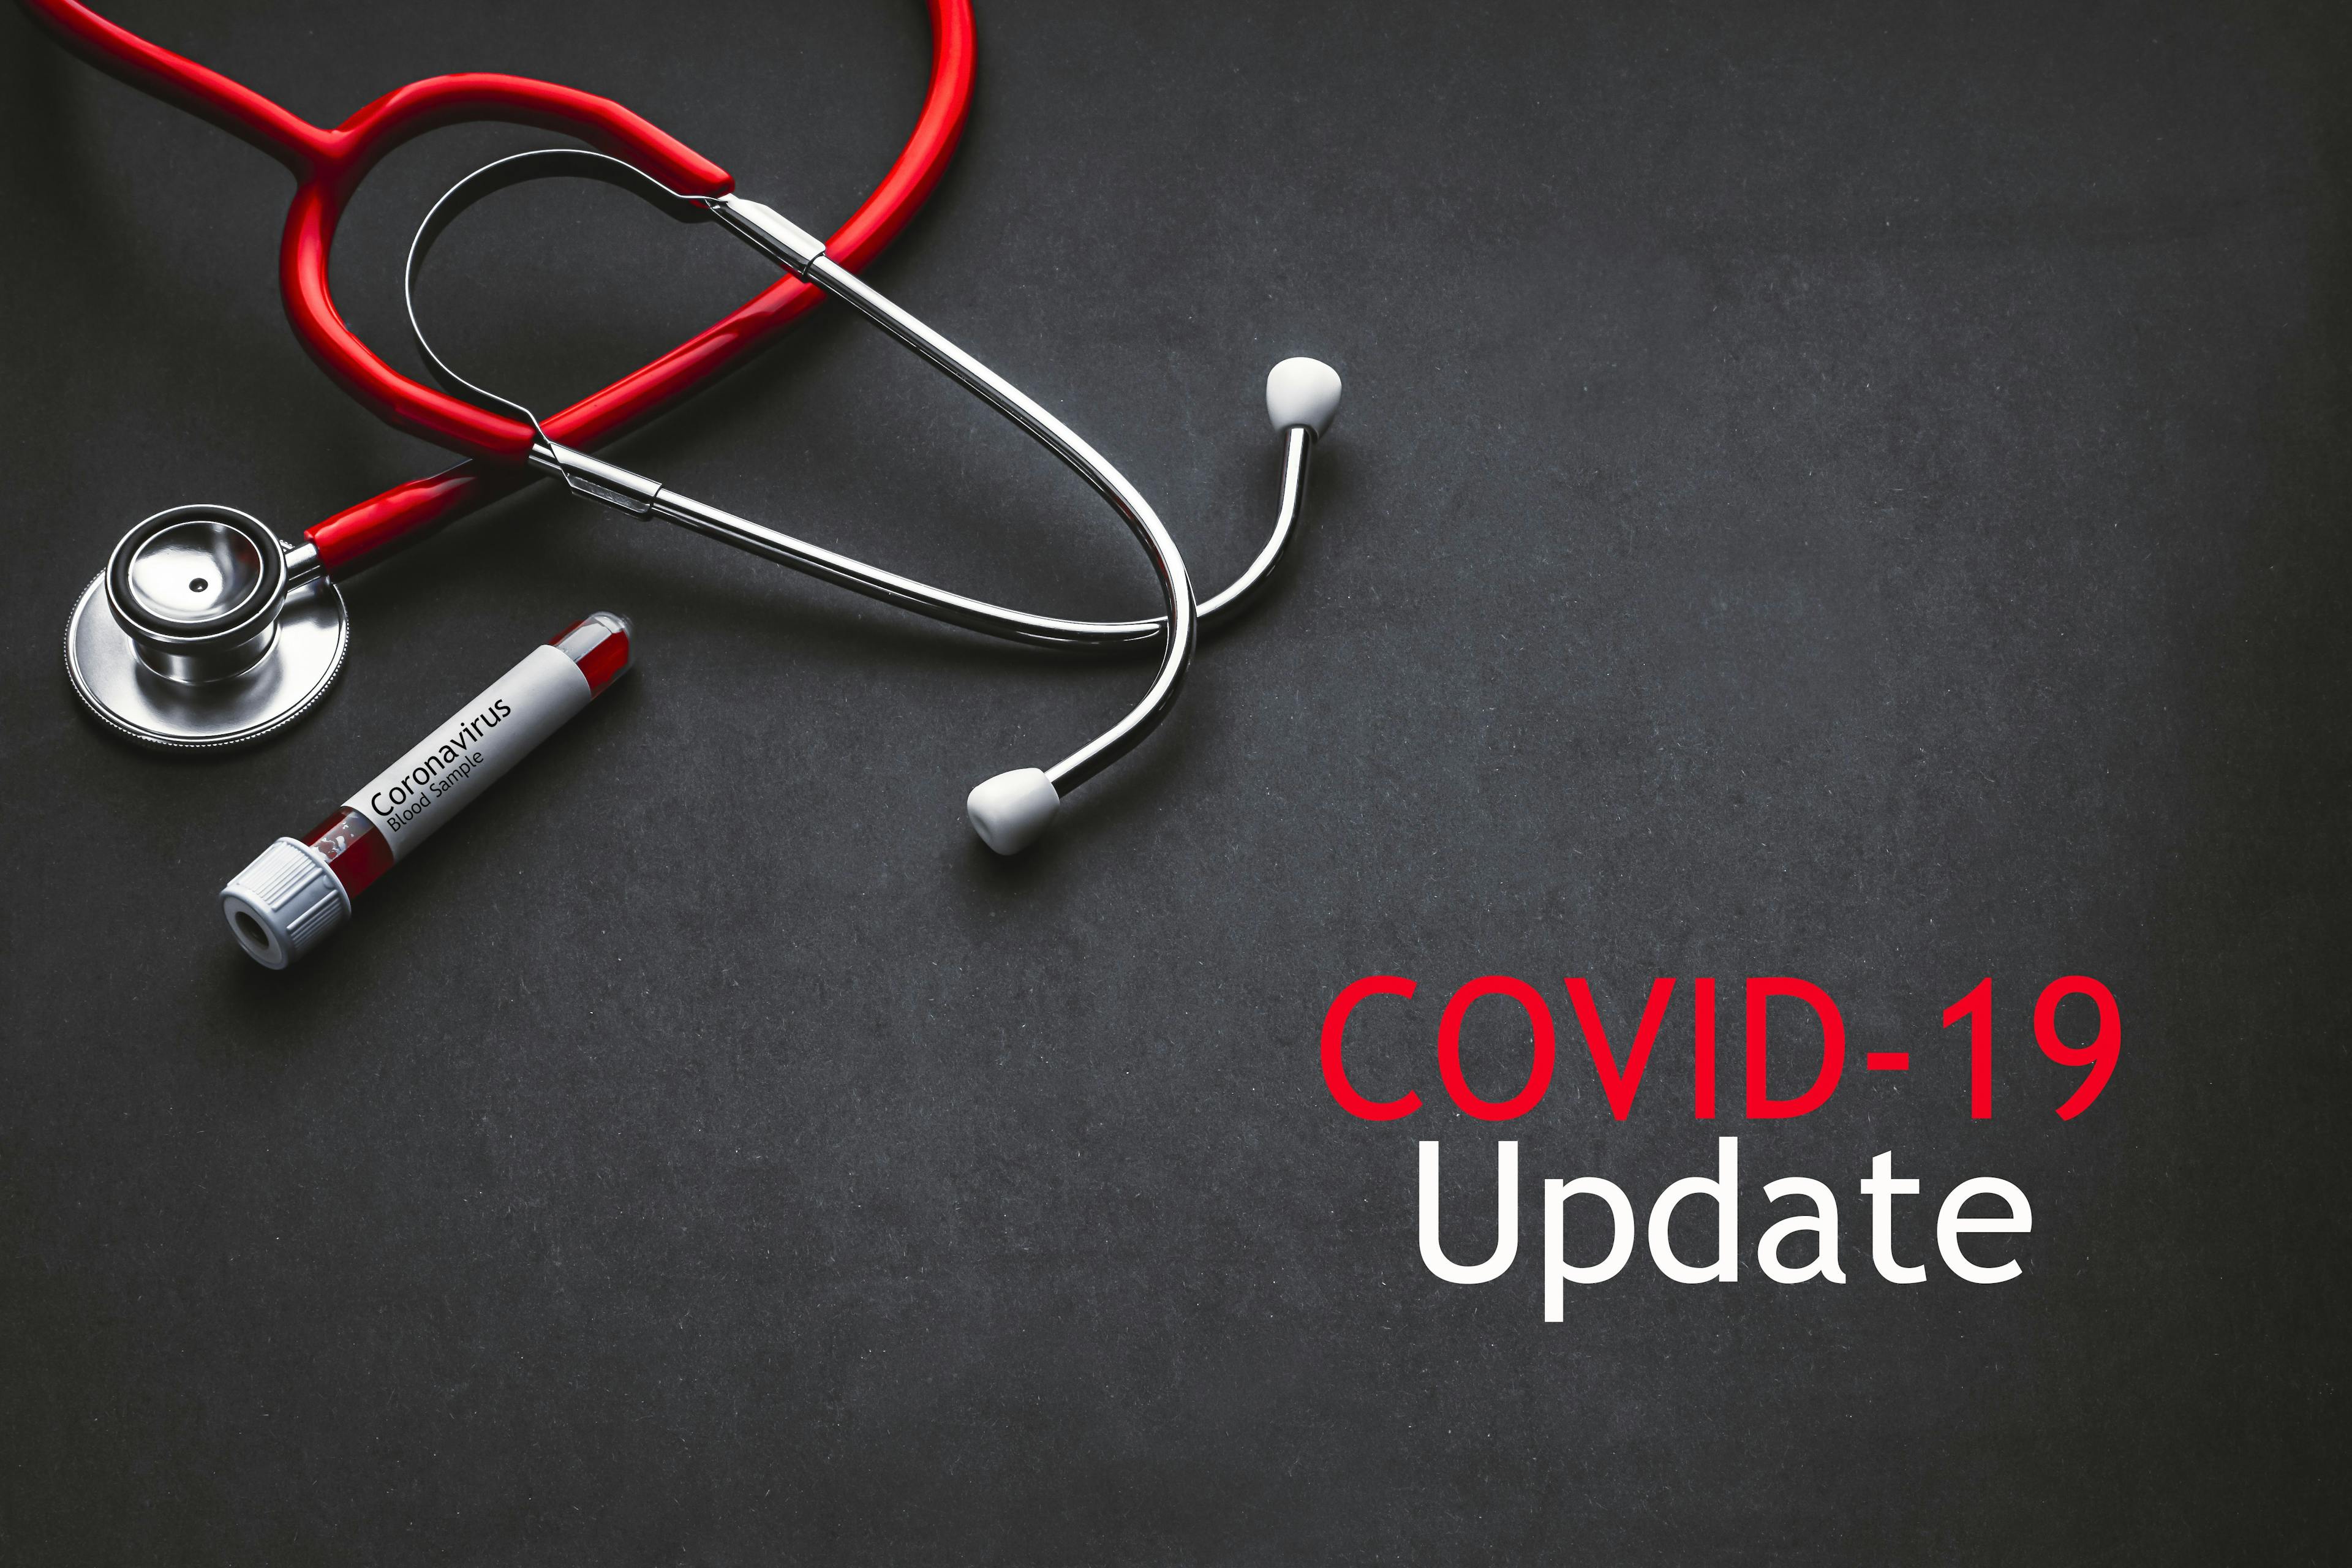 COVID-19 Update: Global Cases and Recoveries as of June 2, 2020